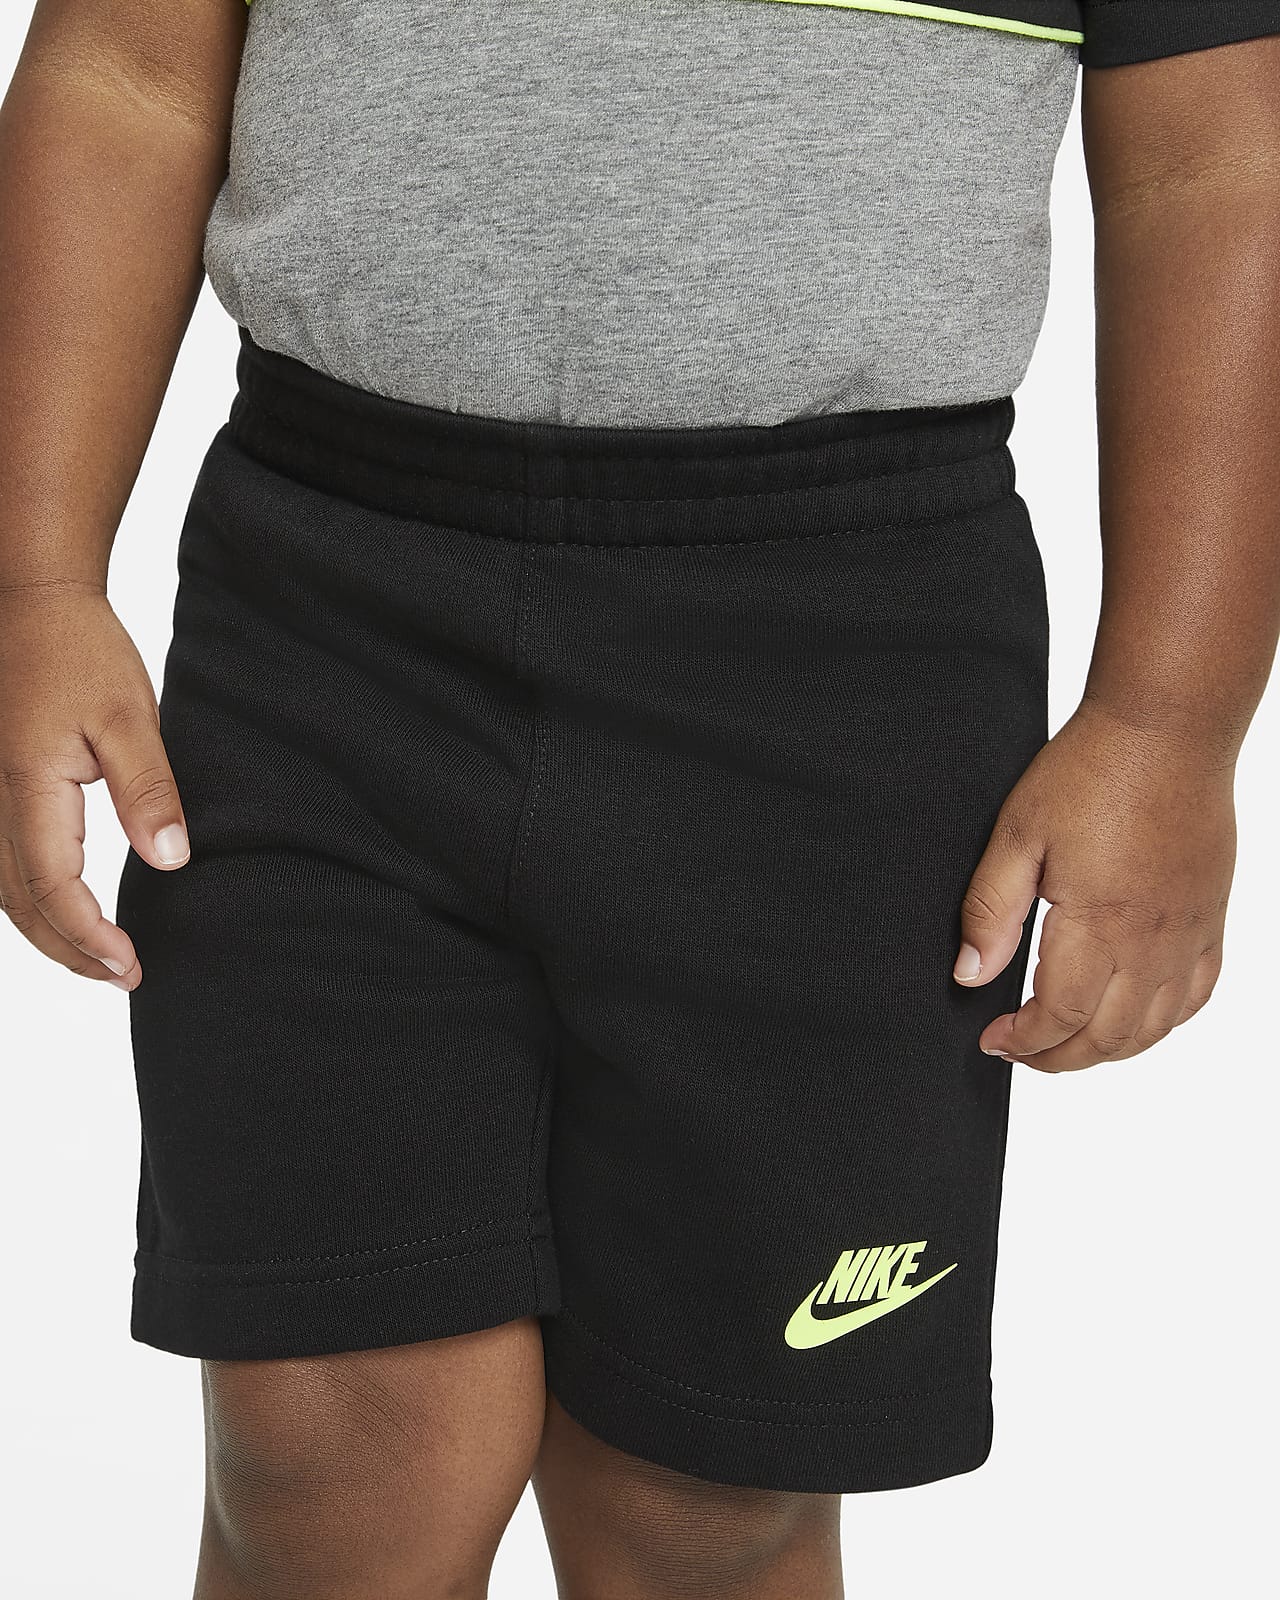 Nike Toddler T-Shirt and French Terry Shorts Set.